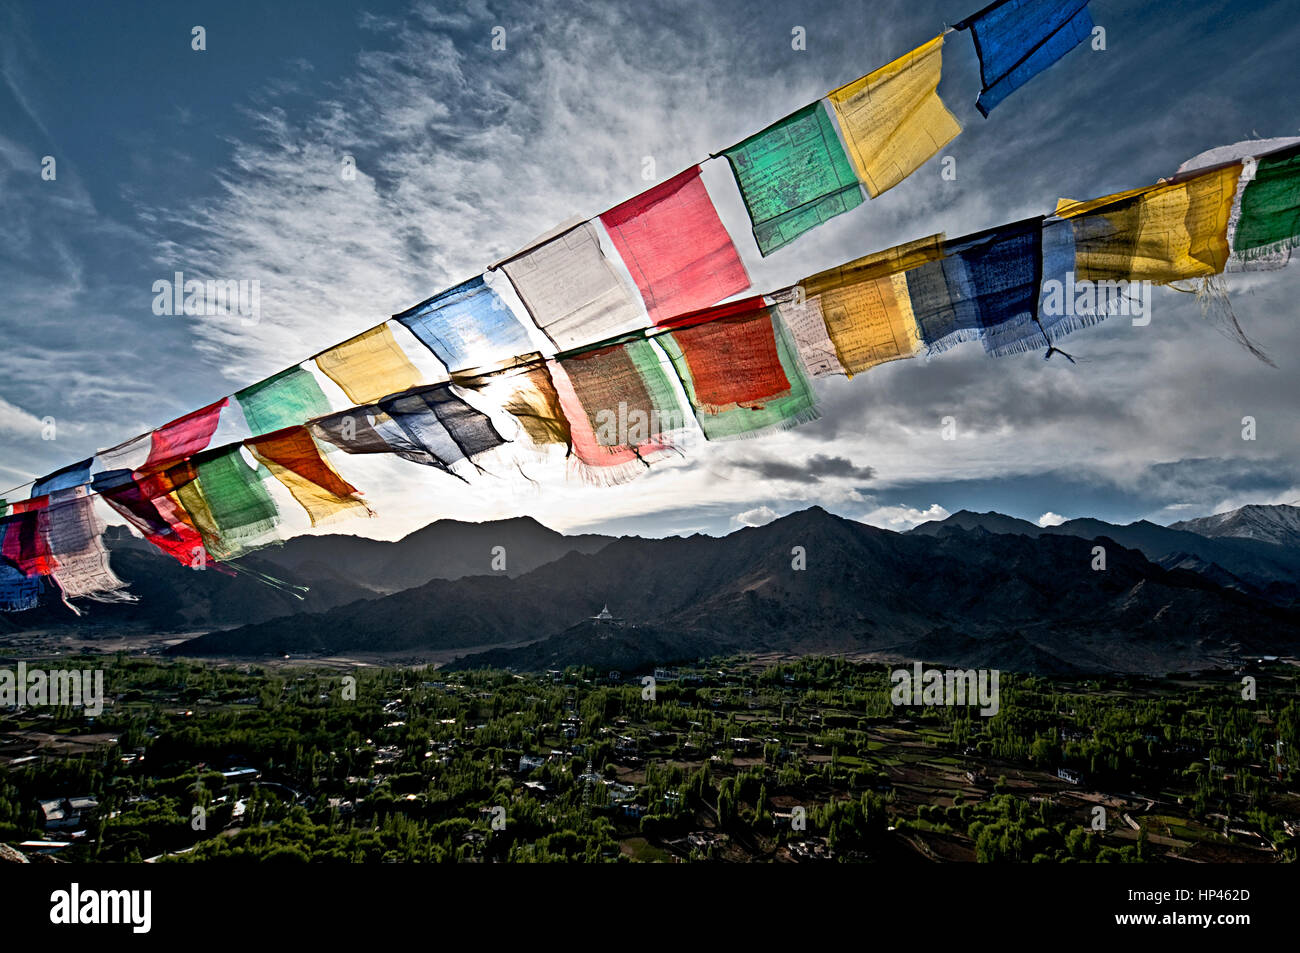 Buddhist prayer flags in foreground, shanti stupa, mountain range, greenery, clouds and the sky in background at Leh, Ladakh, India Stock Photo